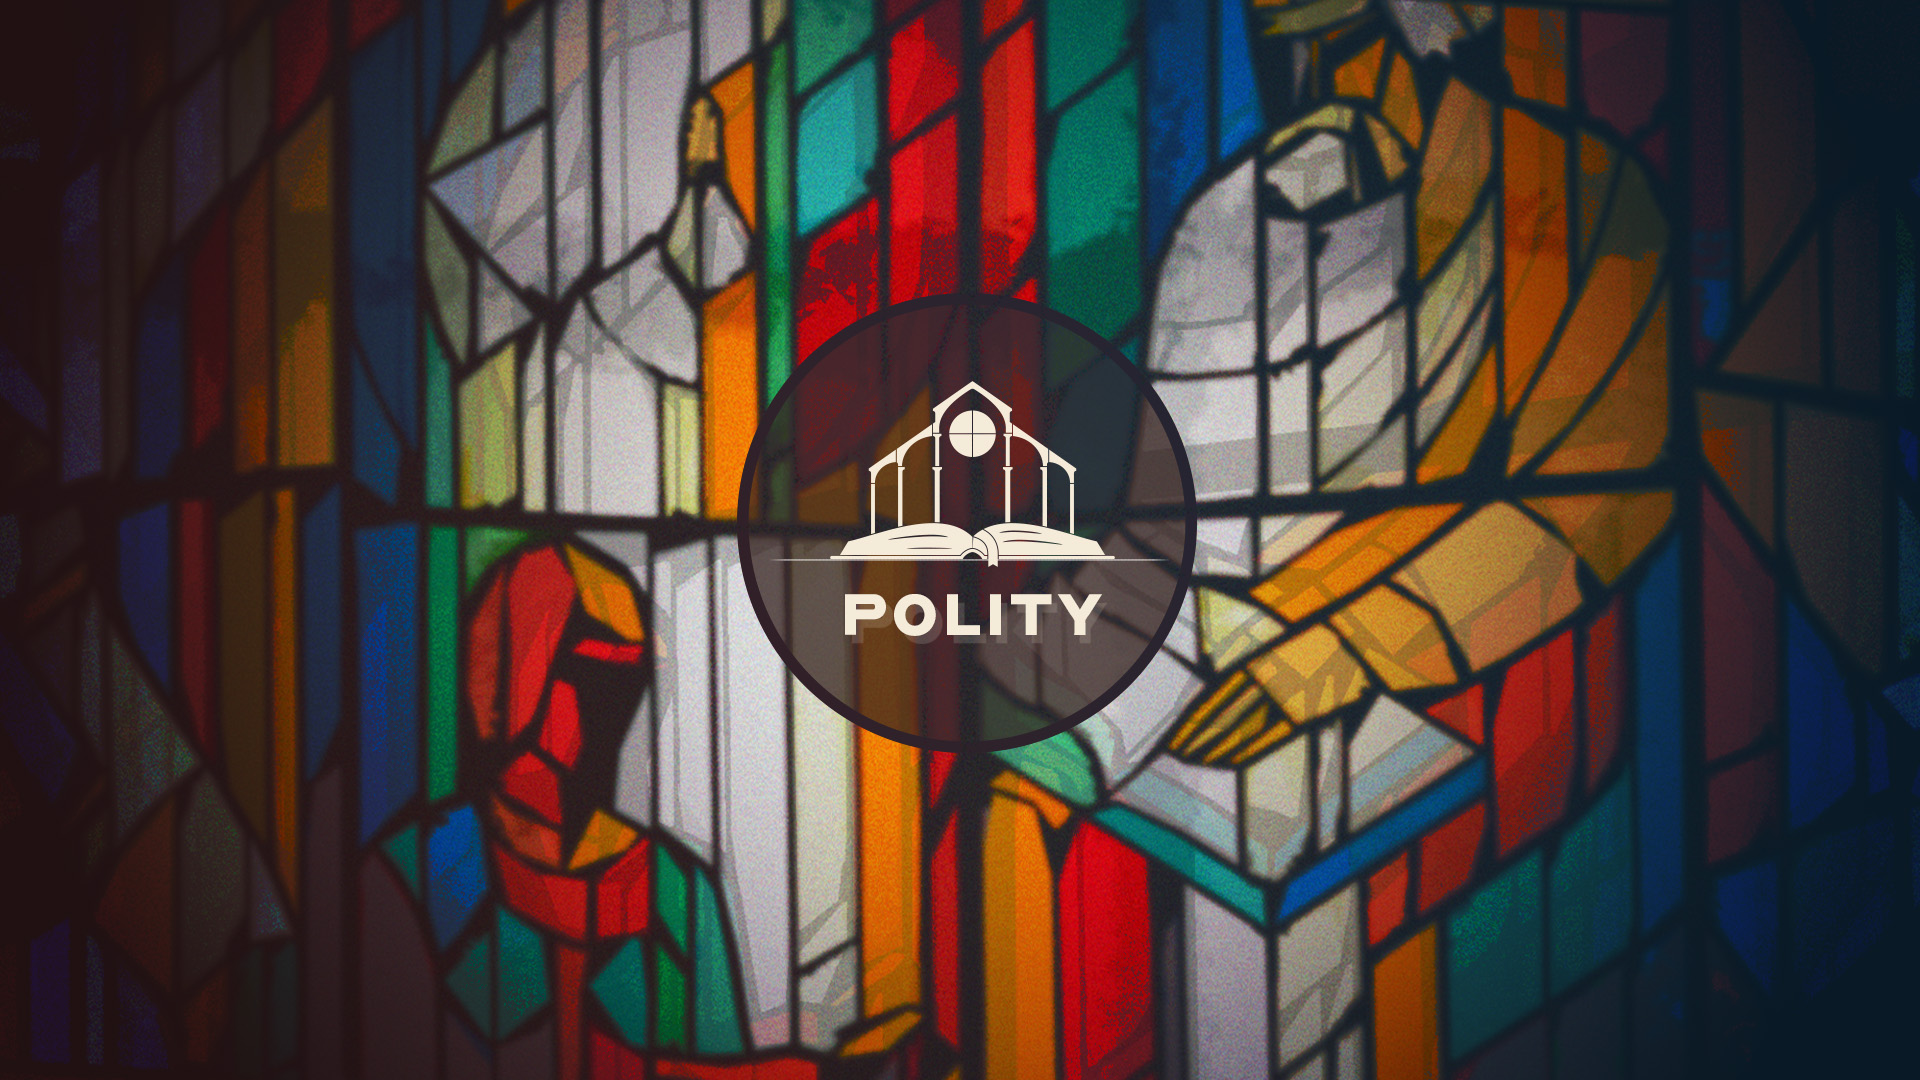 Polity, Part 1: “Ordinances: Who is In and Out of the Church?”